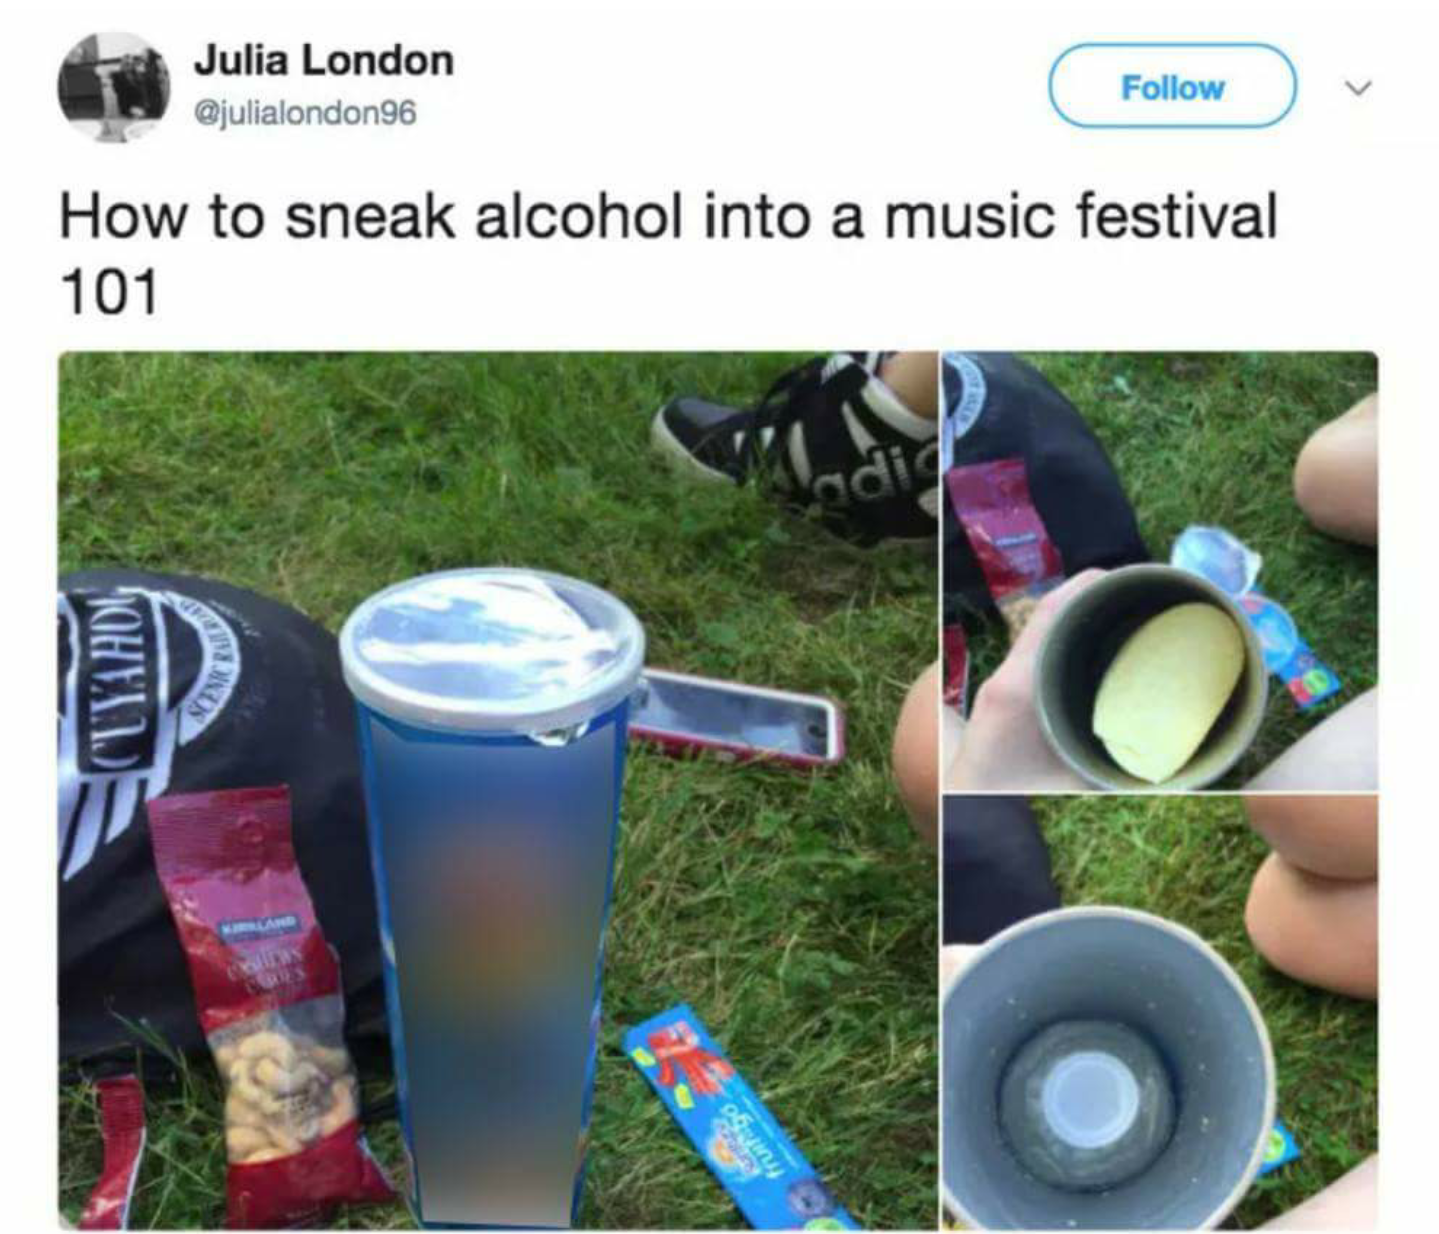 Tweet showing how to sneak alcohol into a music festival in a Pringles can